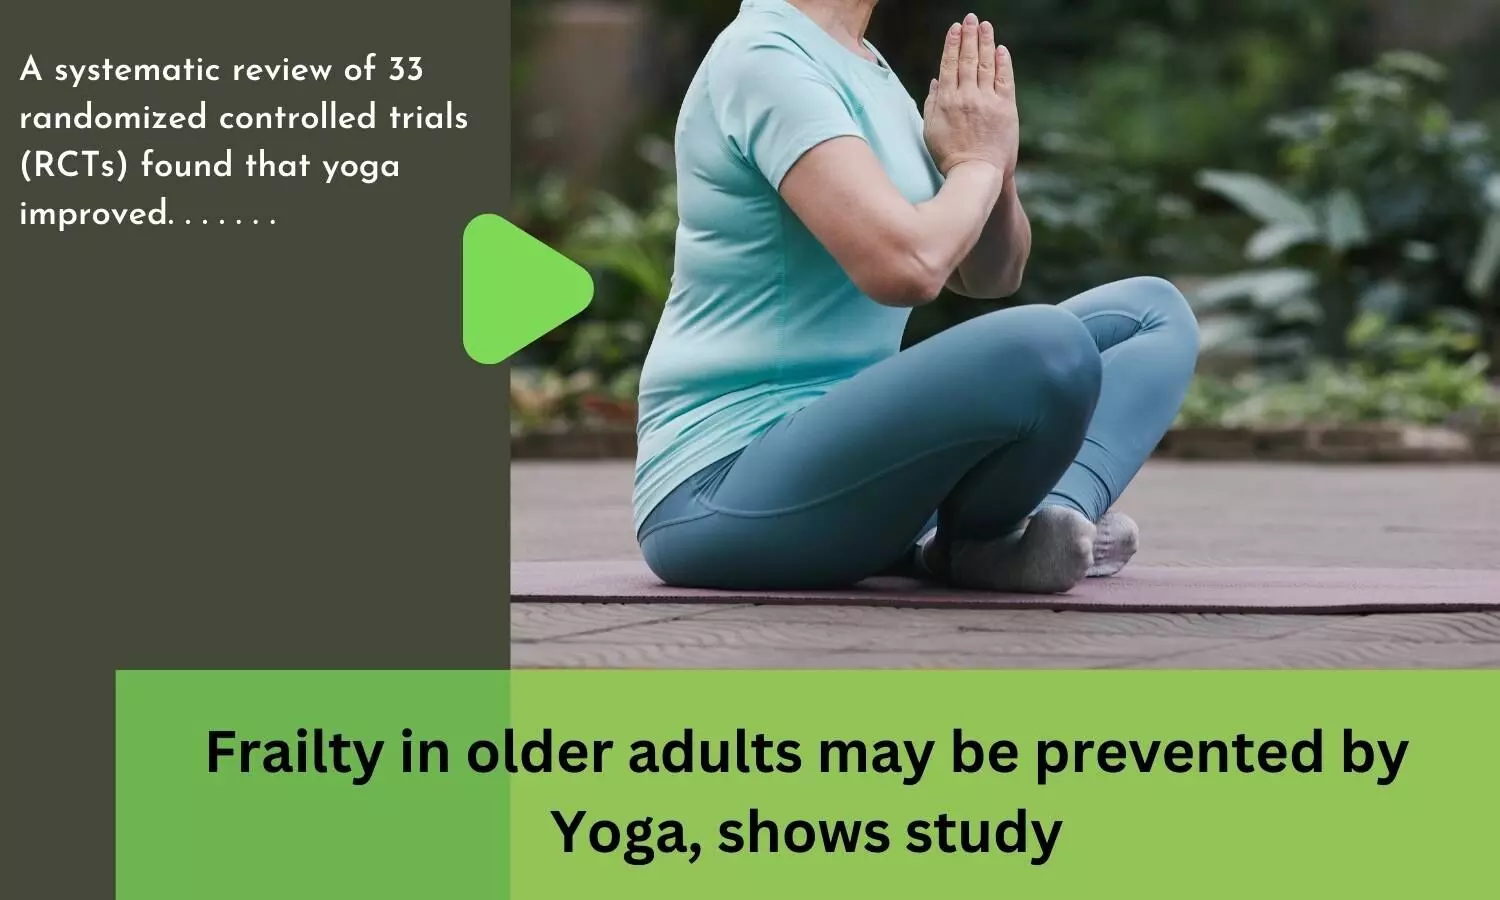 Frailty in older adults may be prevented by Yoga, shows study